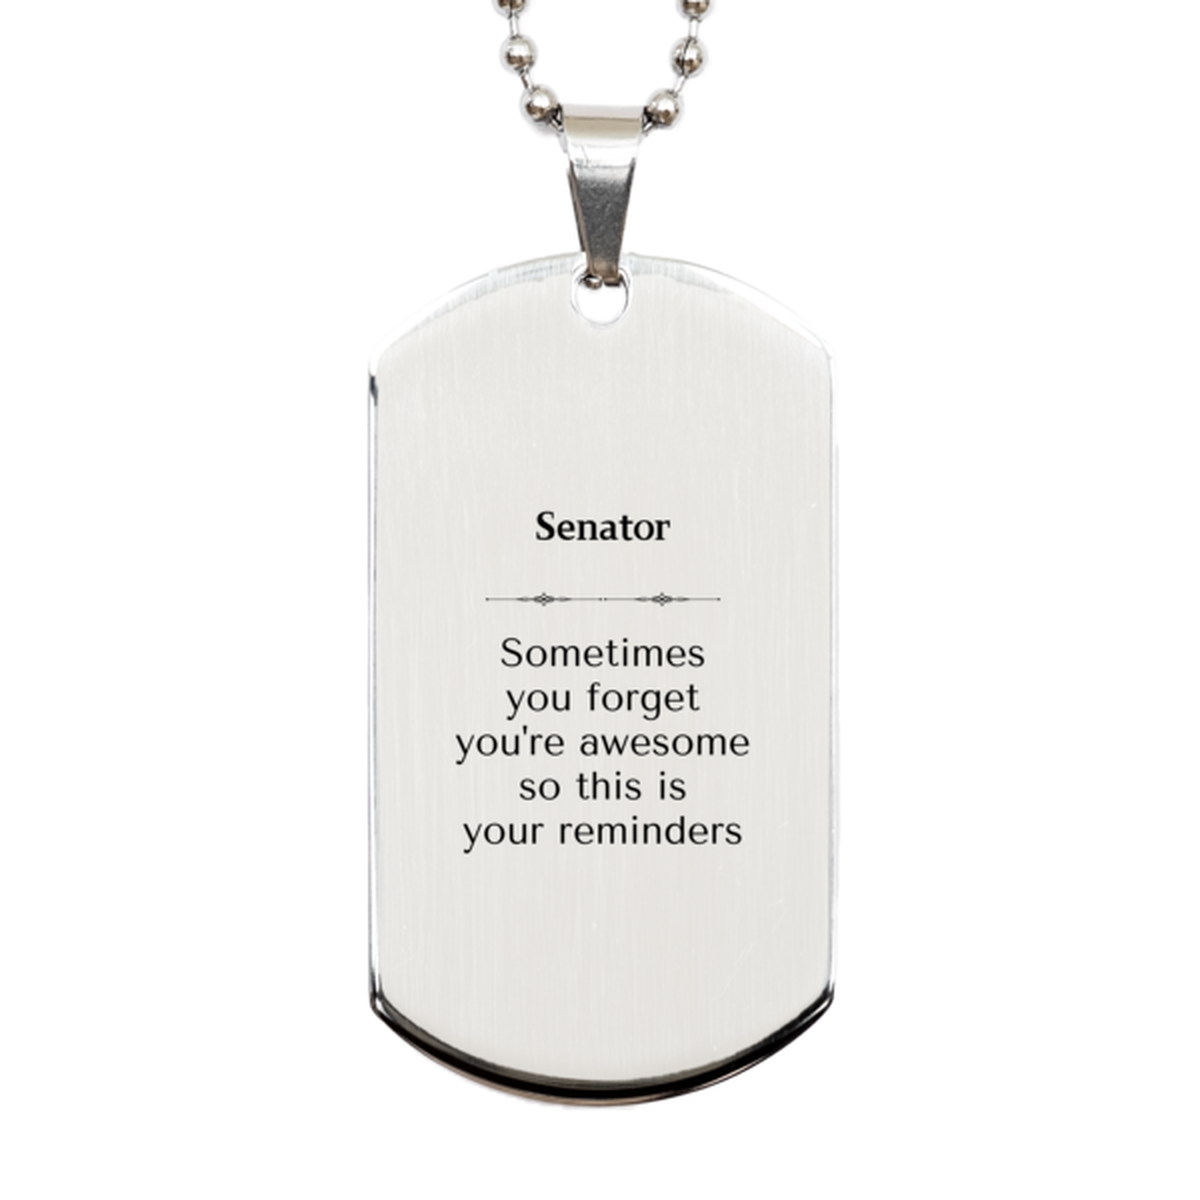 Sentimental Senator Silver Dog Tag, Senator Sometimes you forget you're awesome so this is your reminders, Graduation Christmas Birthday Gifts for Senator, Men, Women, Coworkers